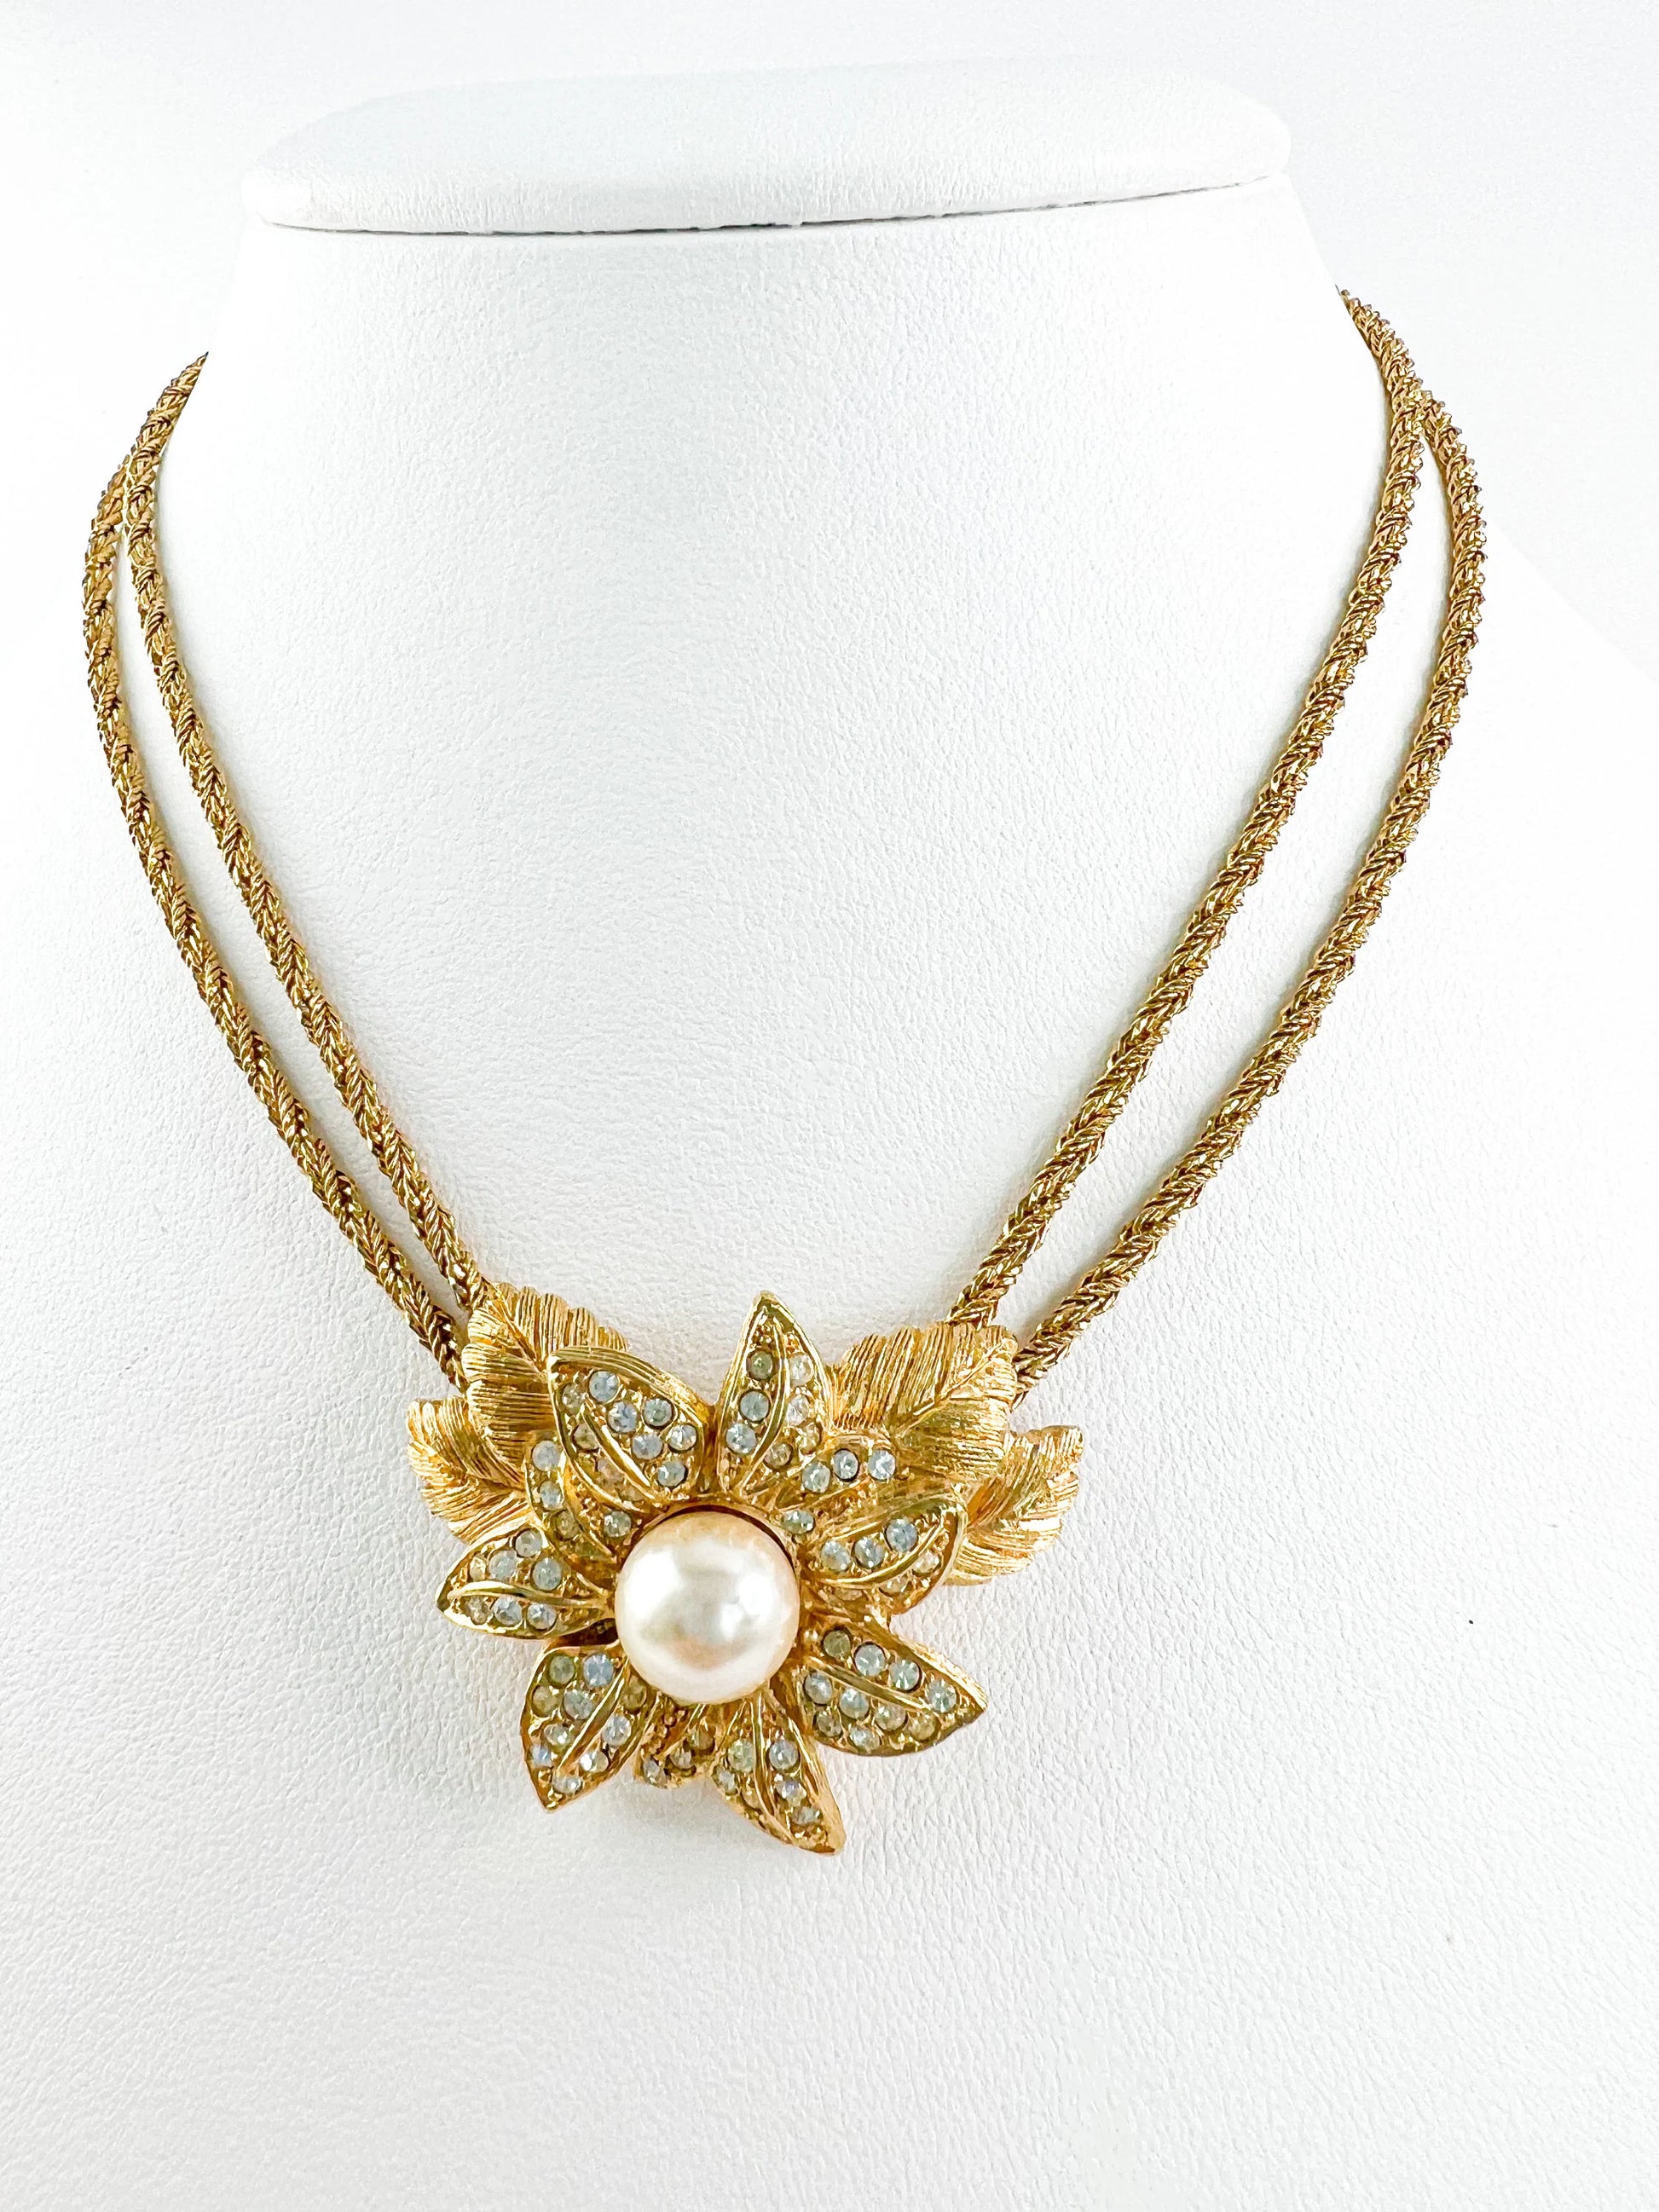 Vintage Christian Dior Necklace, Choker Necklace Gold, Vintage Rhinestone, Bridal Jewelry, Wedding Jewelry, Jewelry for Women, Gift for her